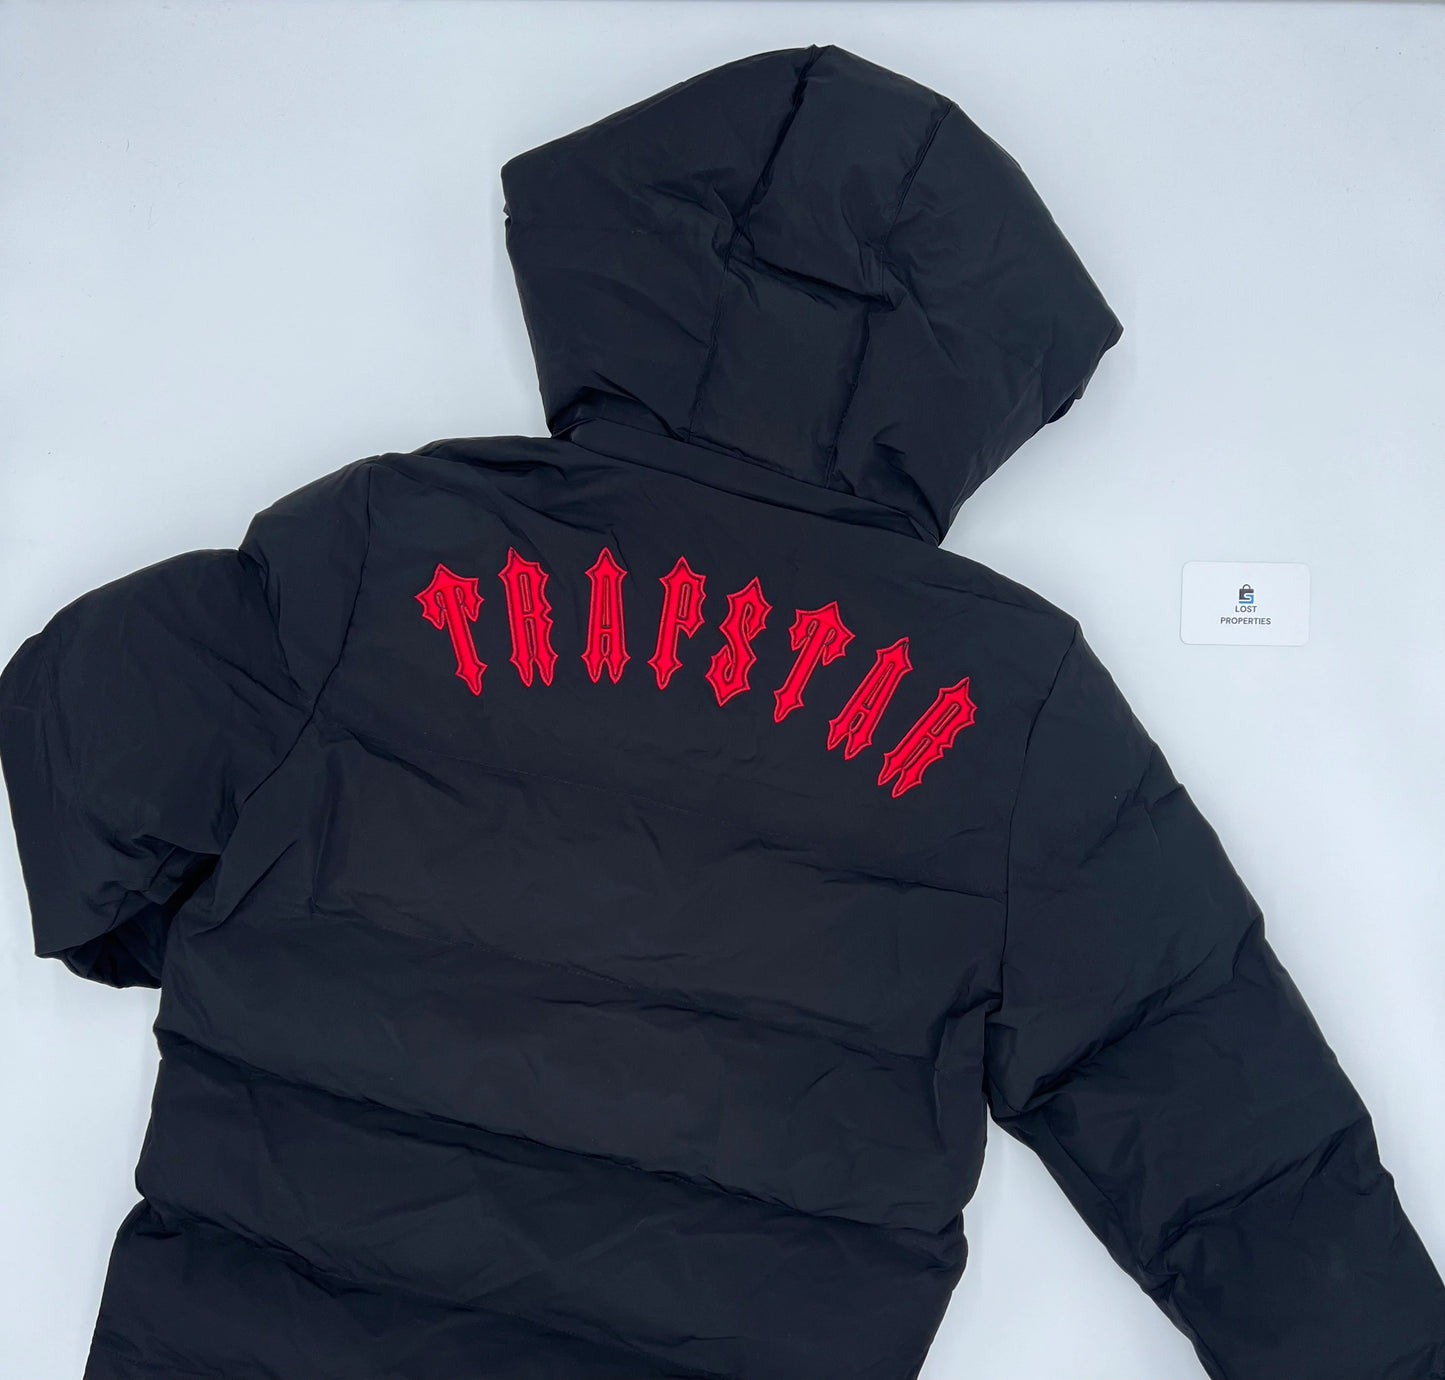 Trapstar Irongate Detachable Hooded Puffer Jacket - Black/Infrared